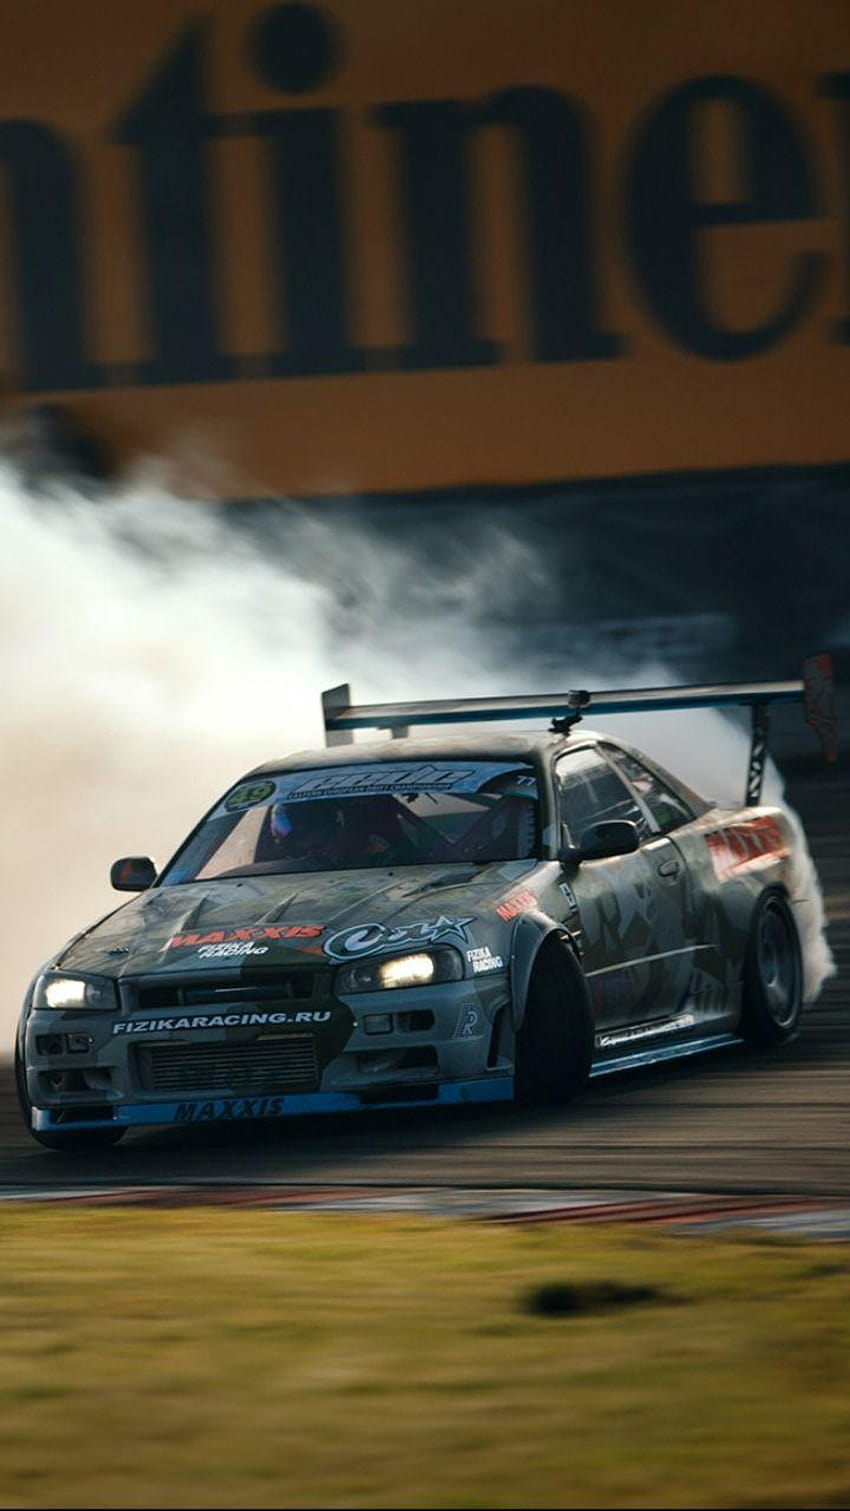 Download Drift wallpapers for mobile phone free Drift HD pictures